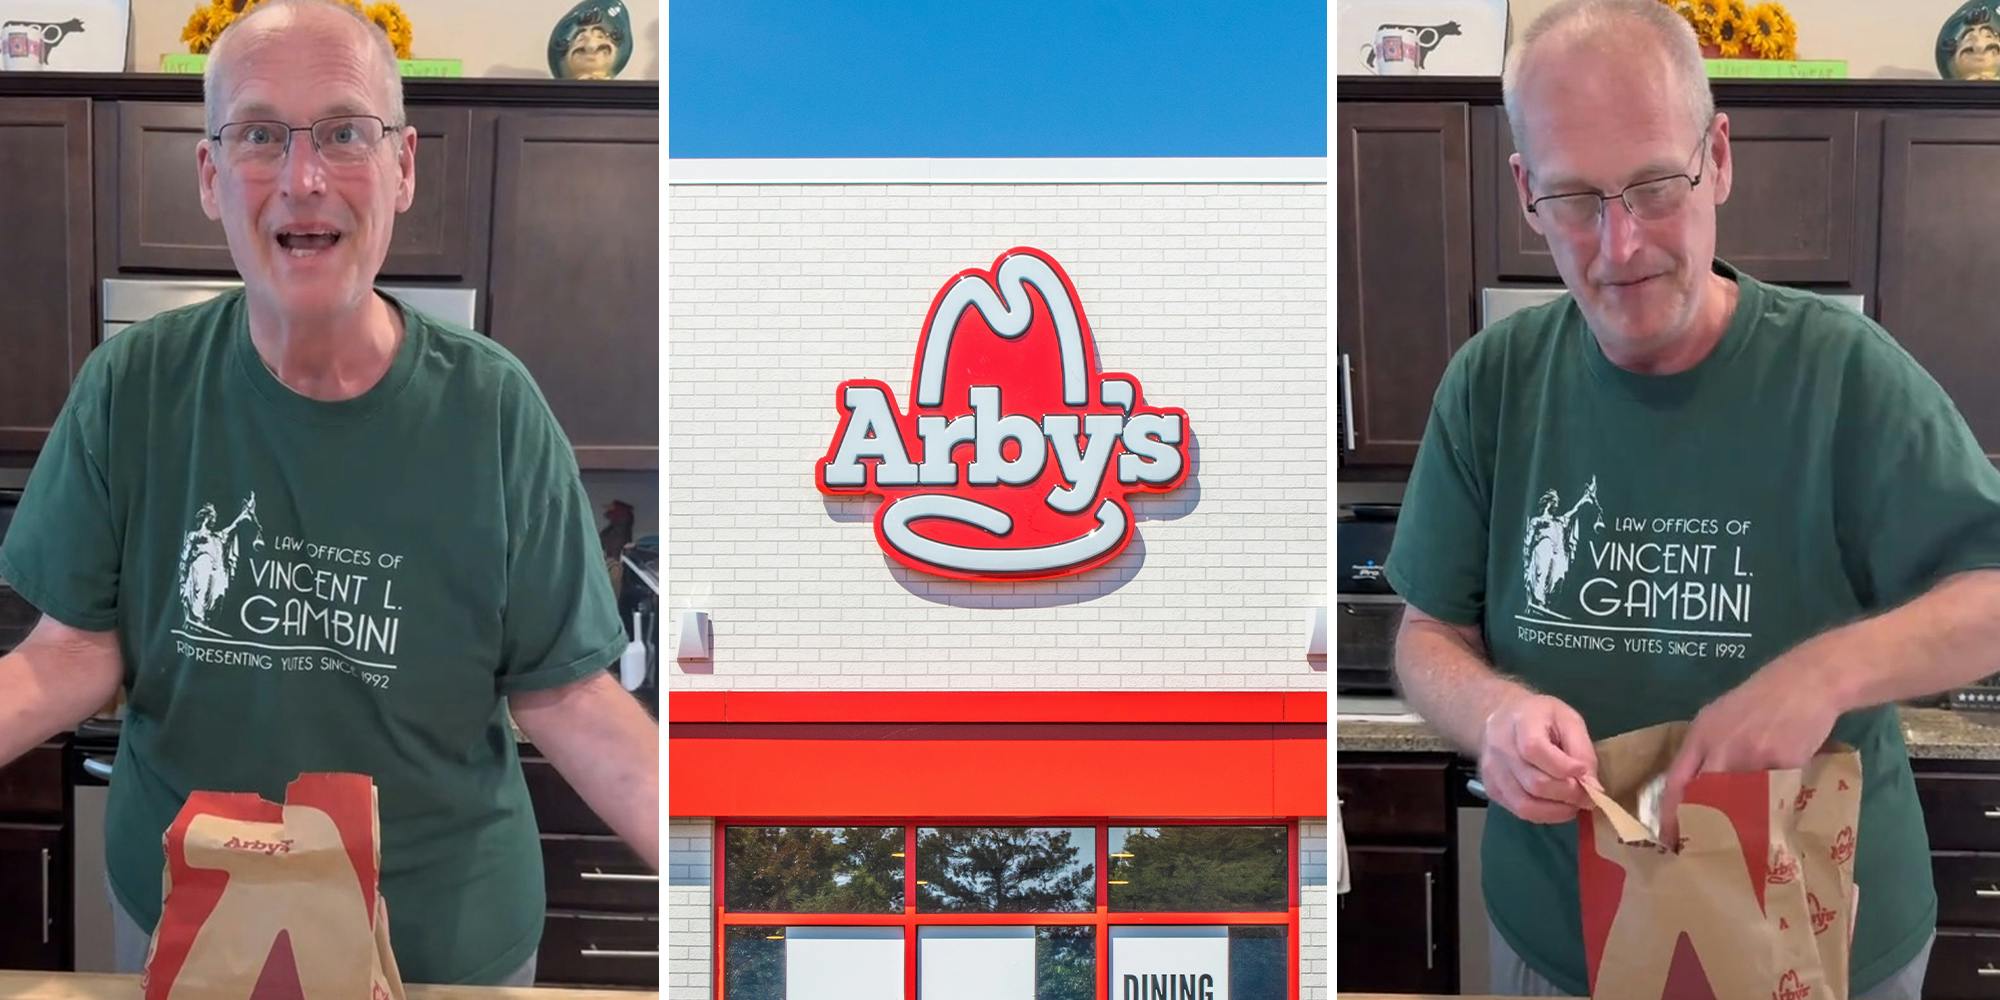 ‘I remember when they had 5 for 5 beef and cheddar’: Arby’s brings back 5 for 5 roast beef. There’s just one problem